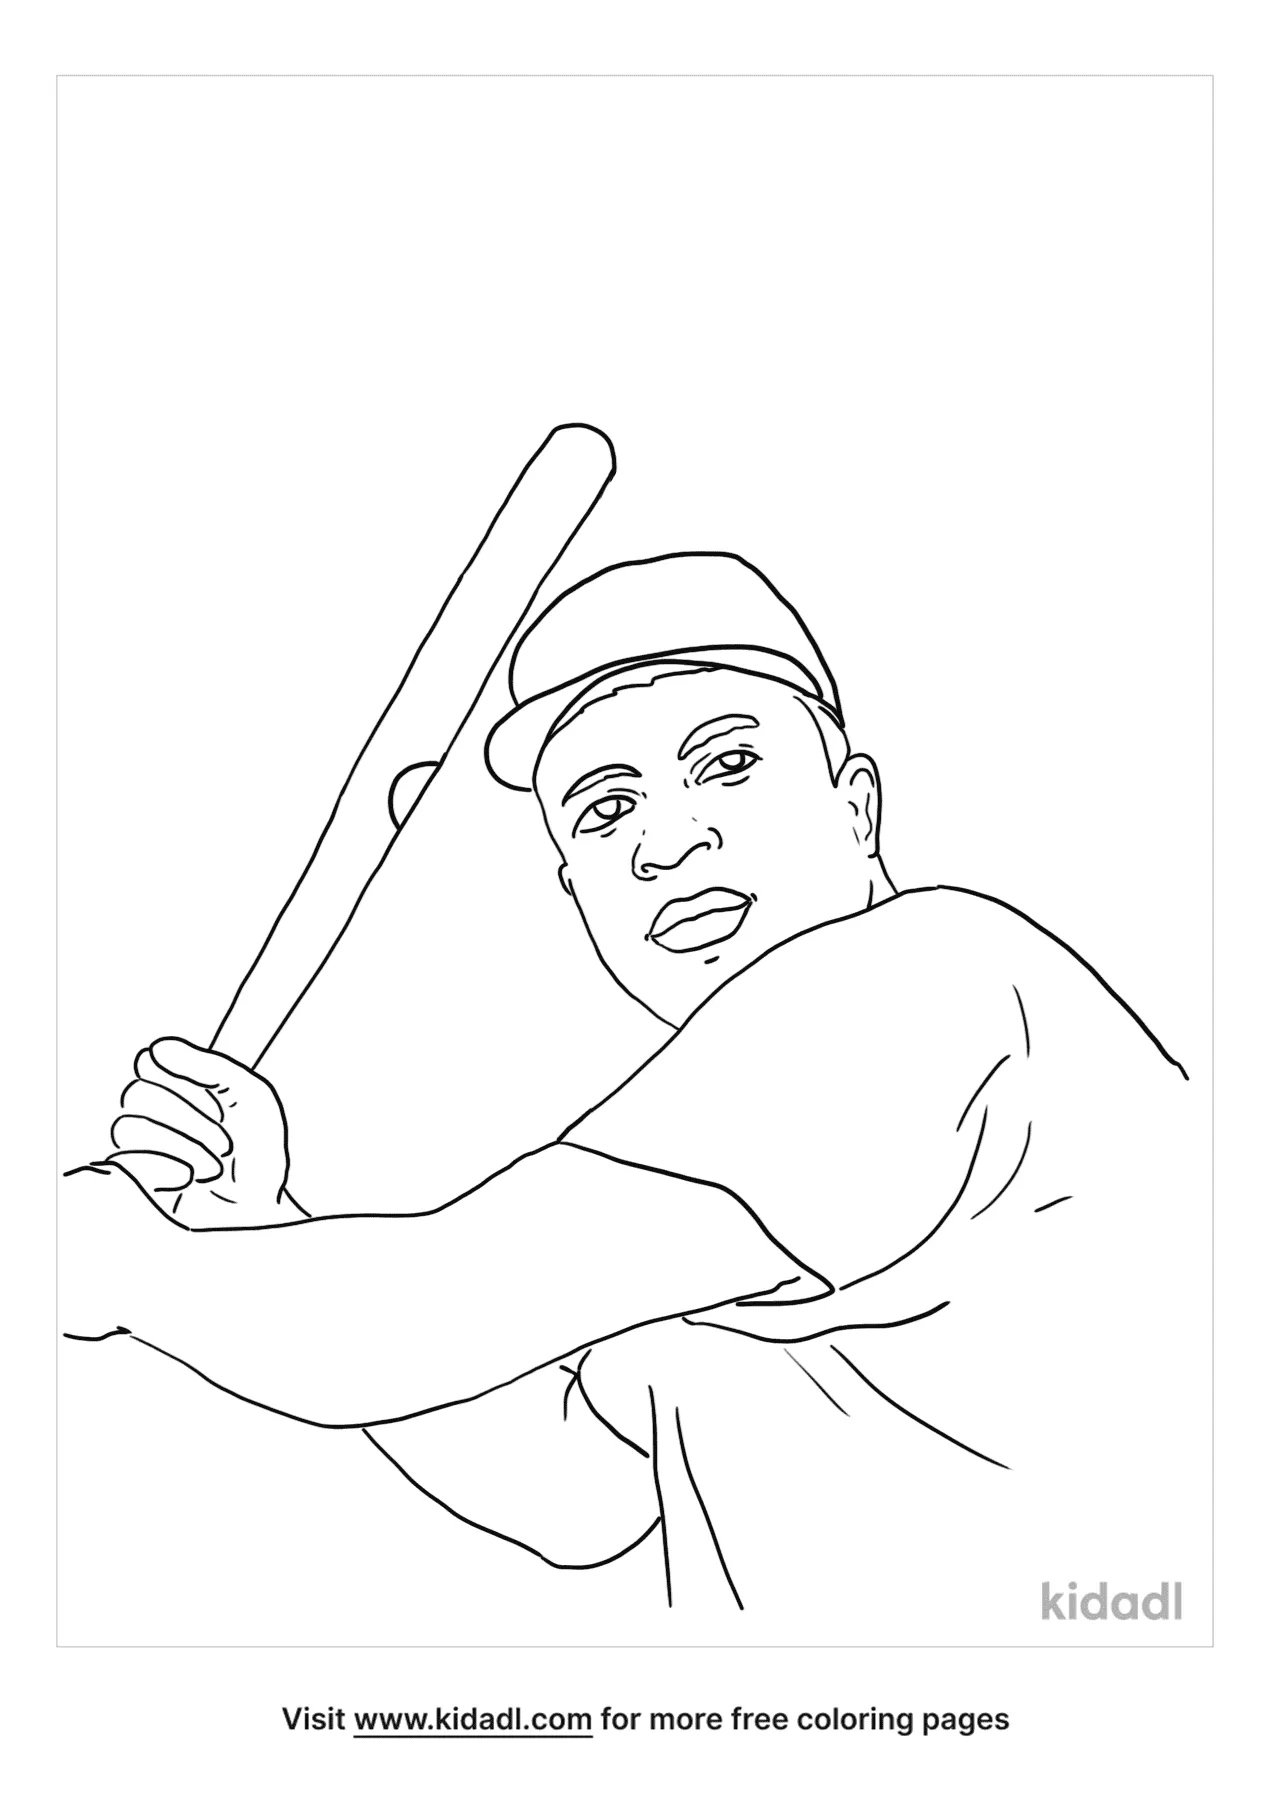 brooklyn dodgers jackie robinson coloring pages